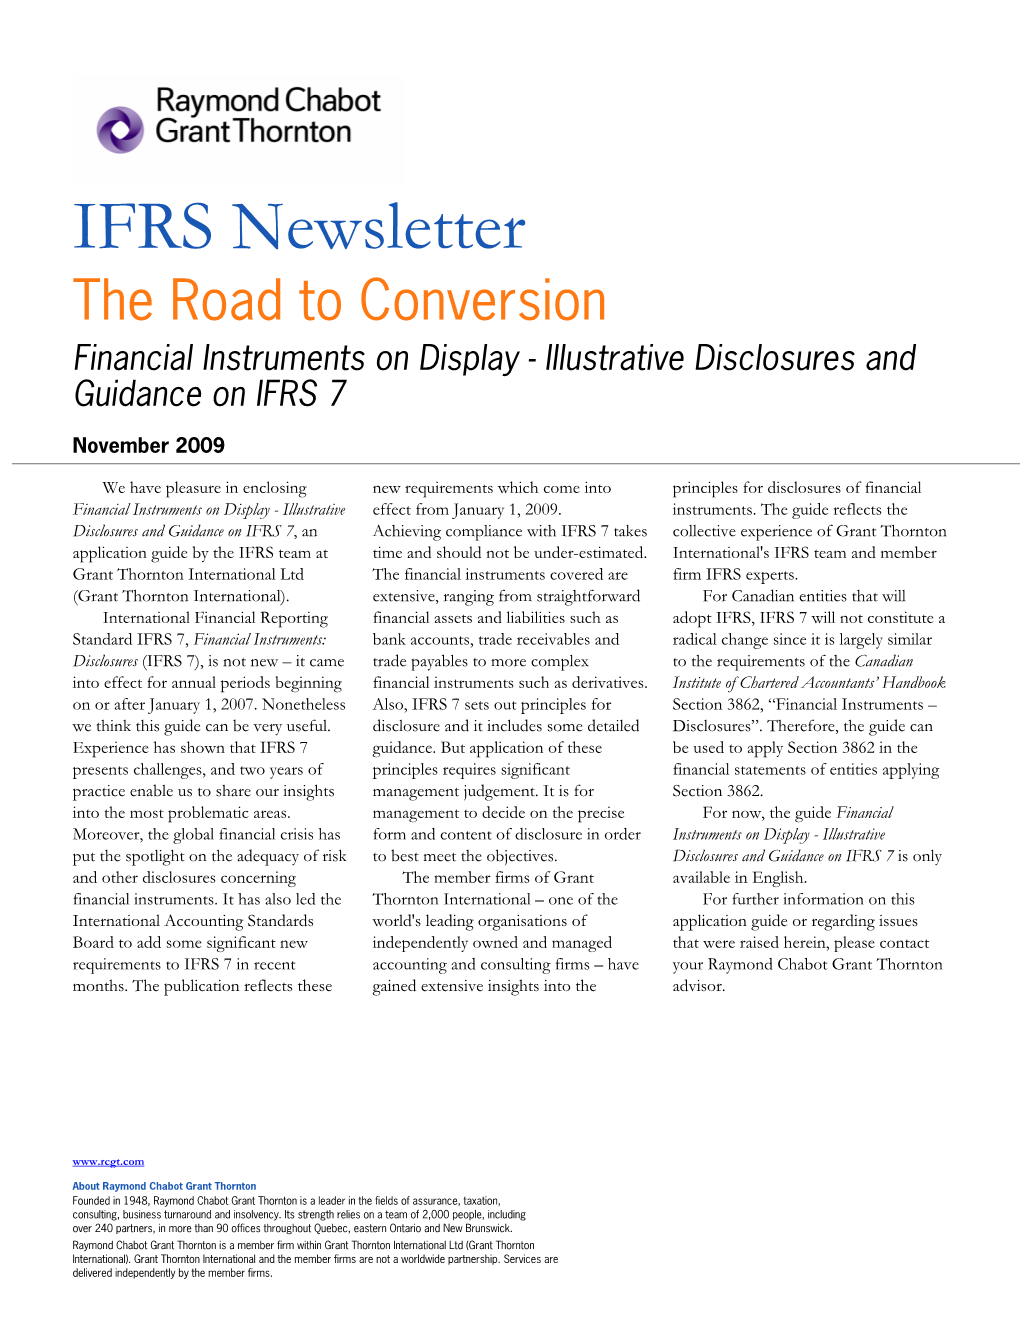 IFRS Newsletter the Road to Conversion Financial Instruments on Display - Illustrative Disclosures and Guidance on IFRS 7